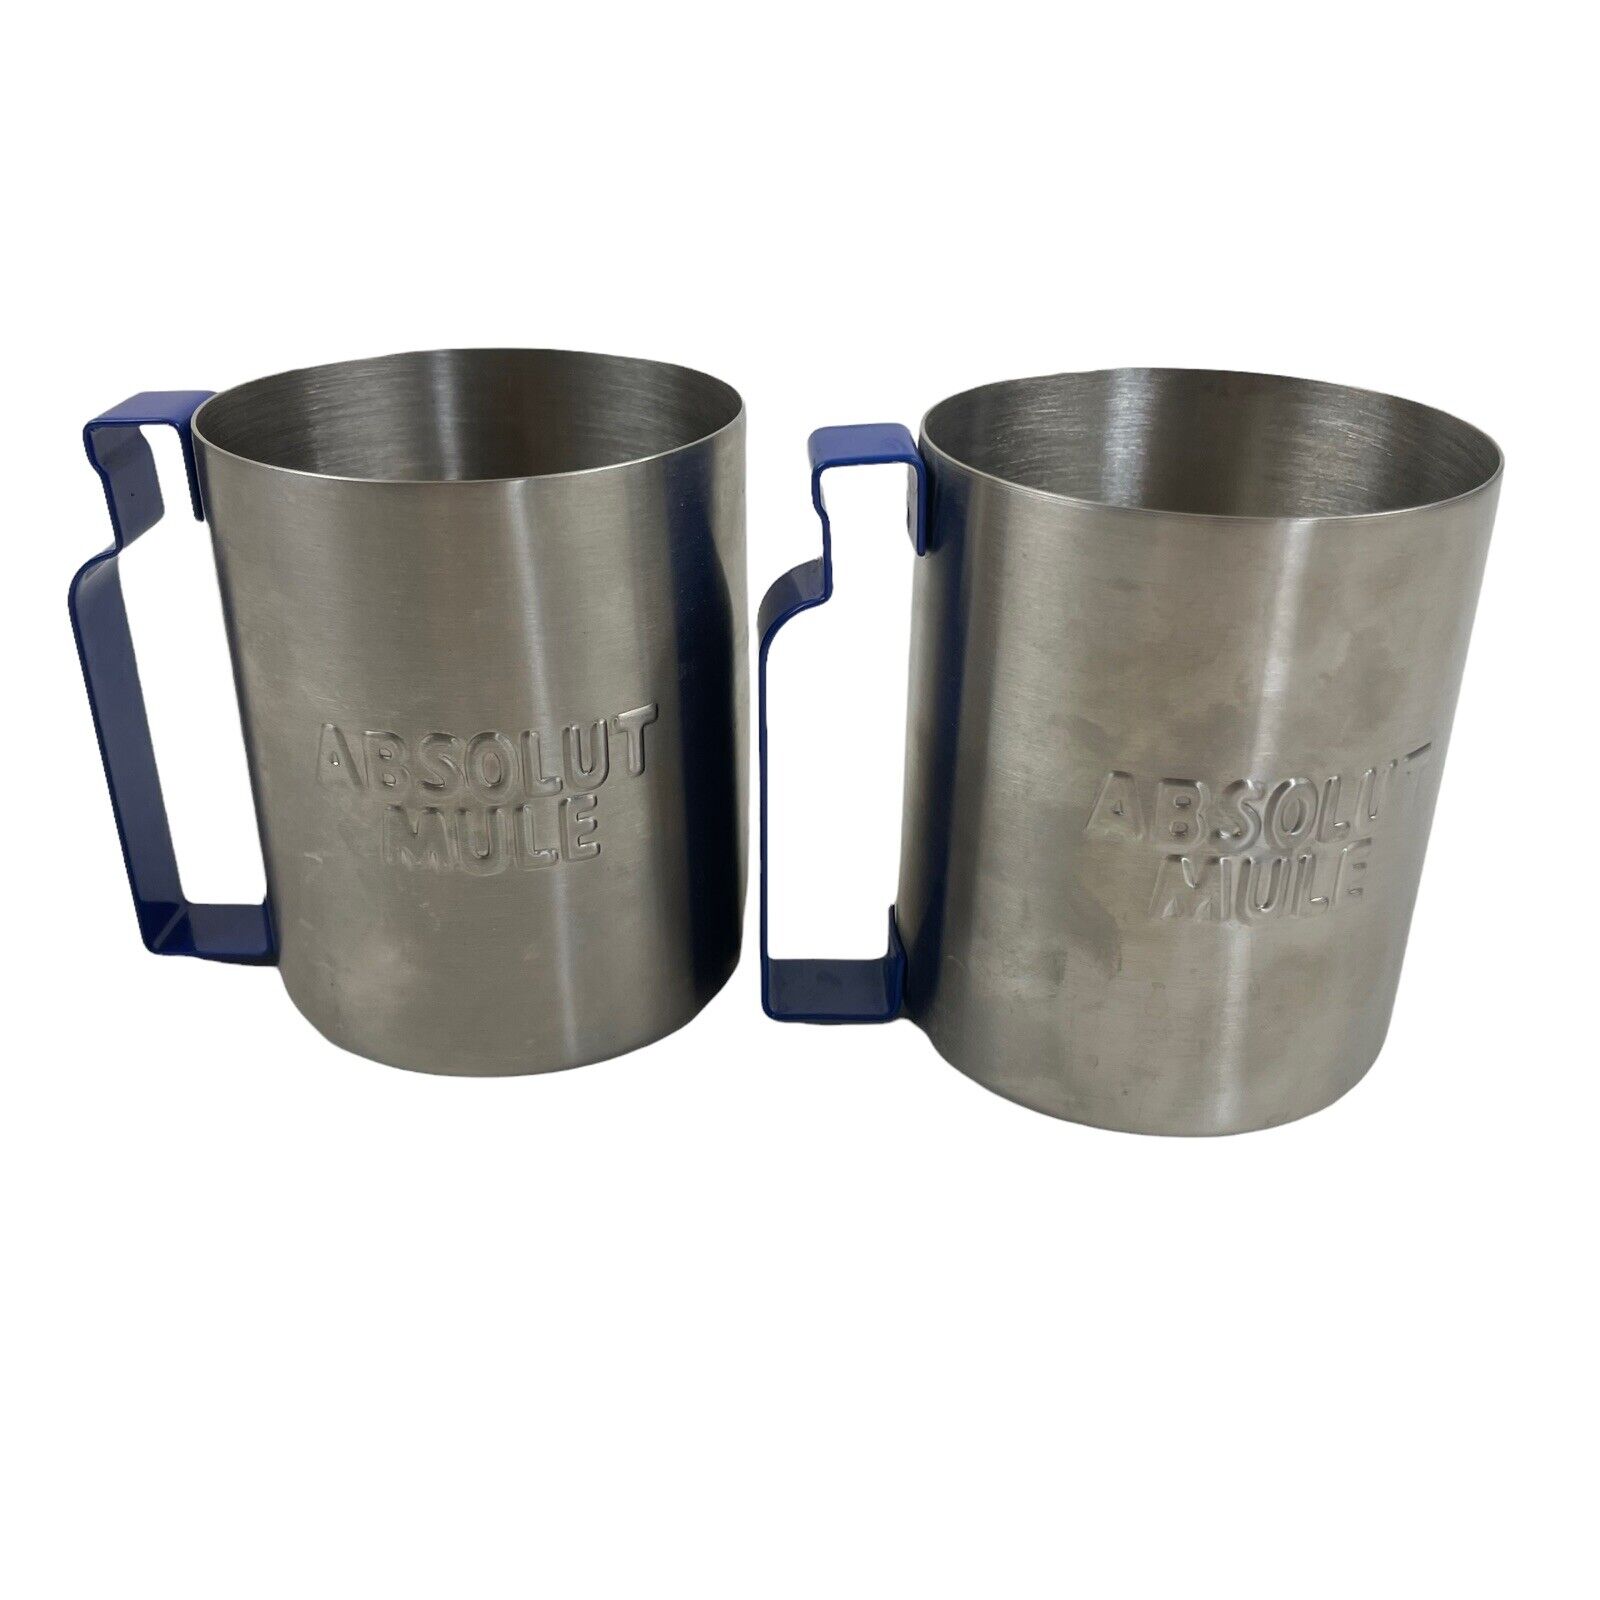 Set of 2 Absolut Vodka Moscow Mule Stainless Steel Silver Mug Cups Blue Handle